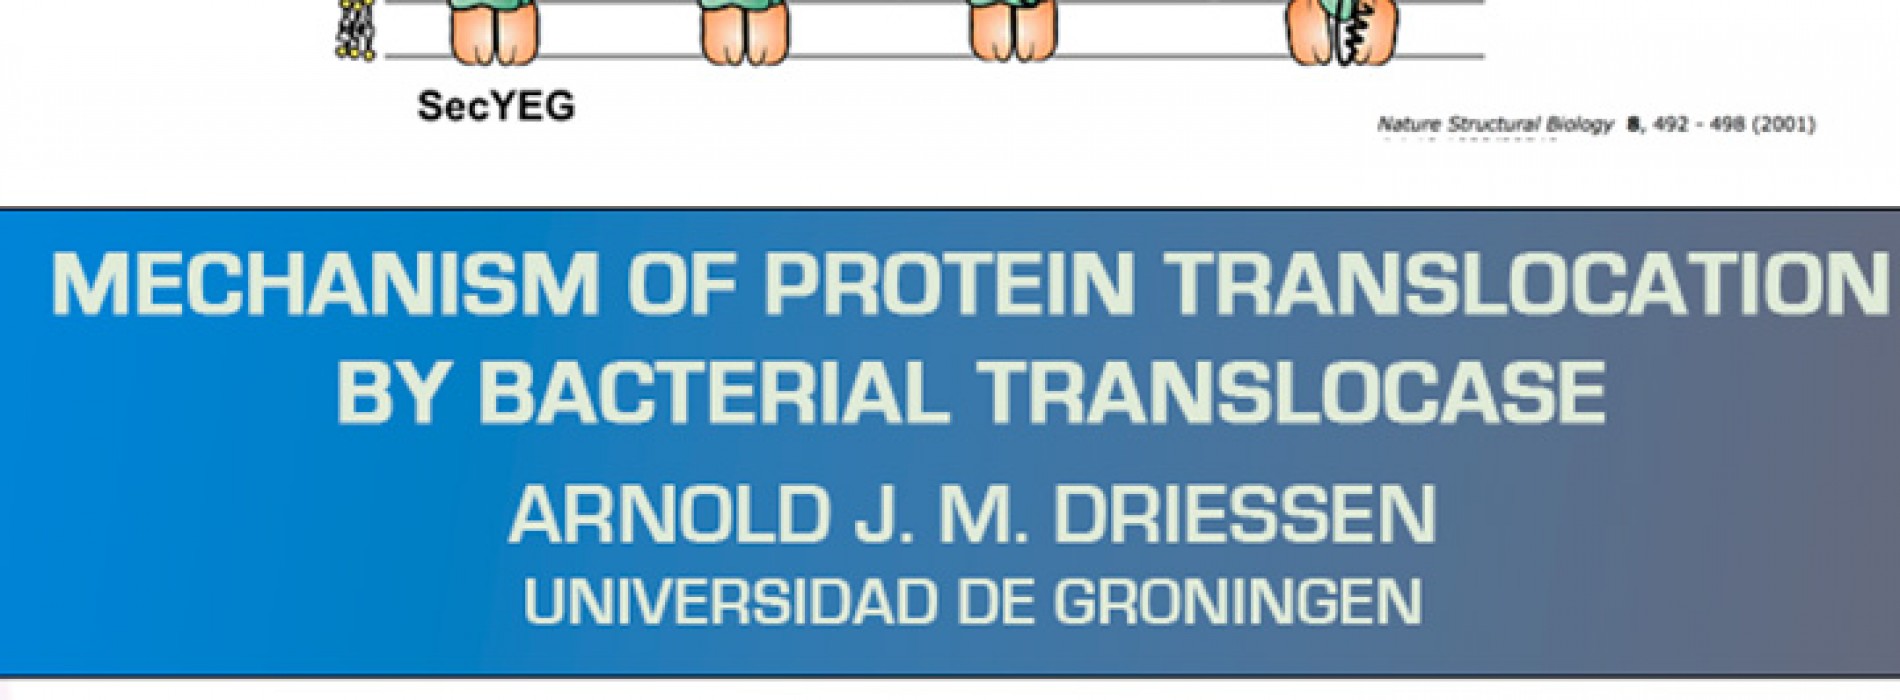 Lecture: "Mechanism of Protein Translocation by Bacterial Translocase"-Arnold J. M. Driessen